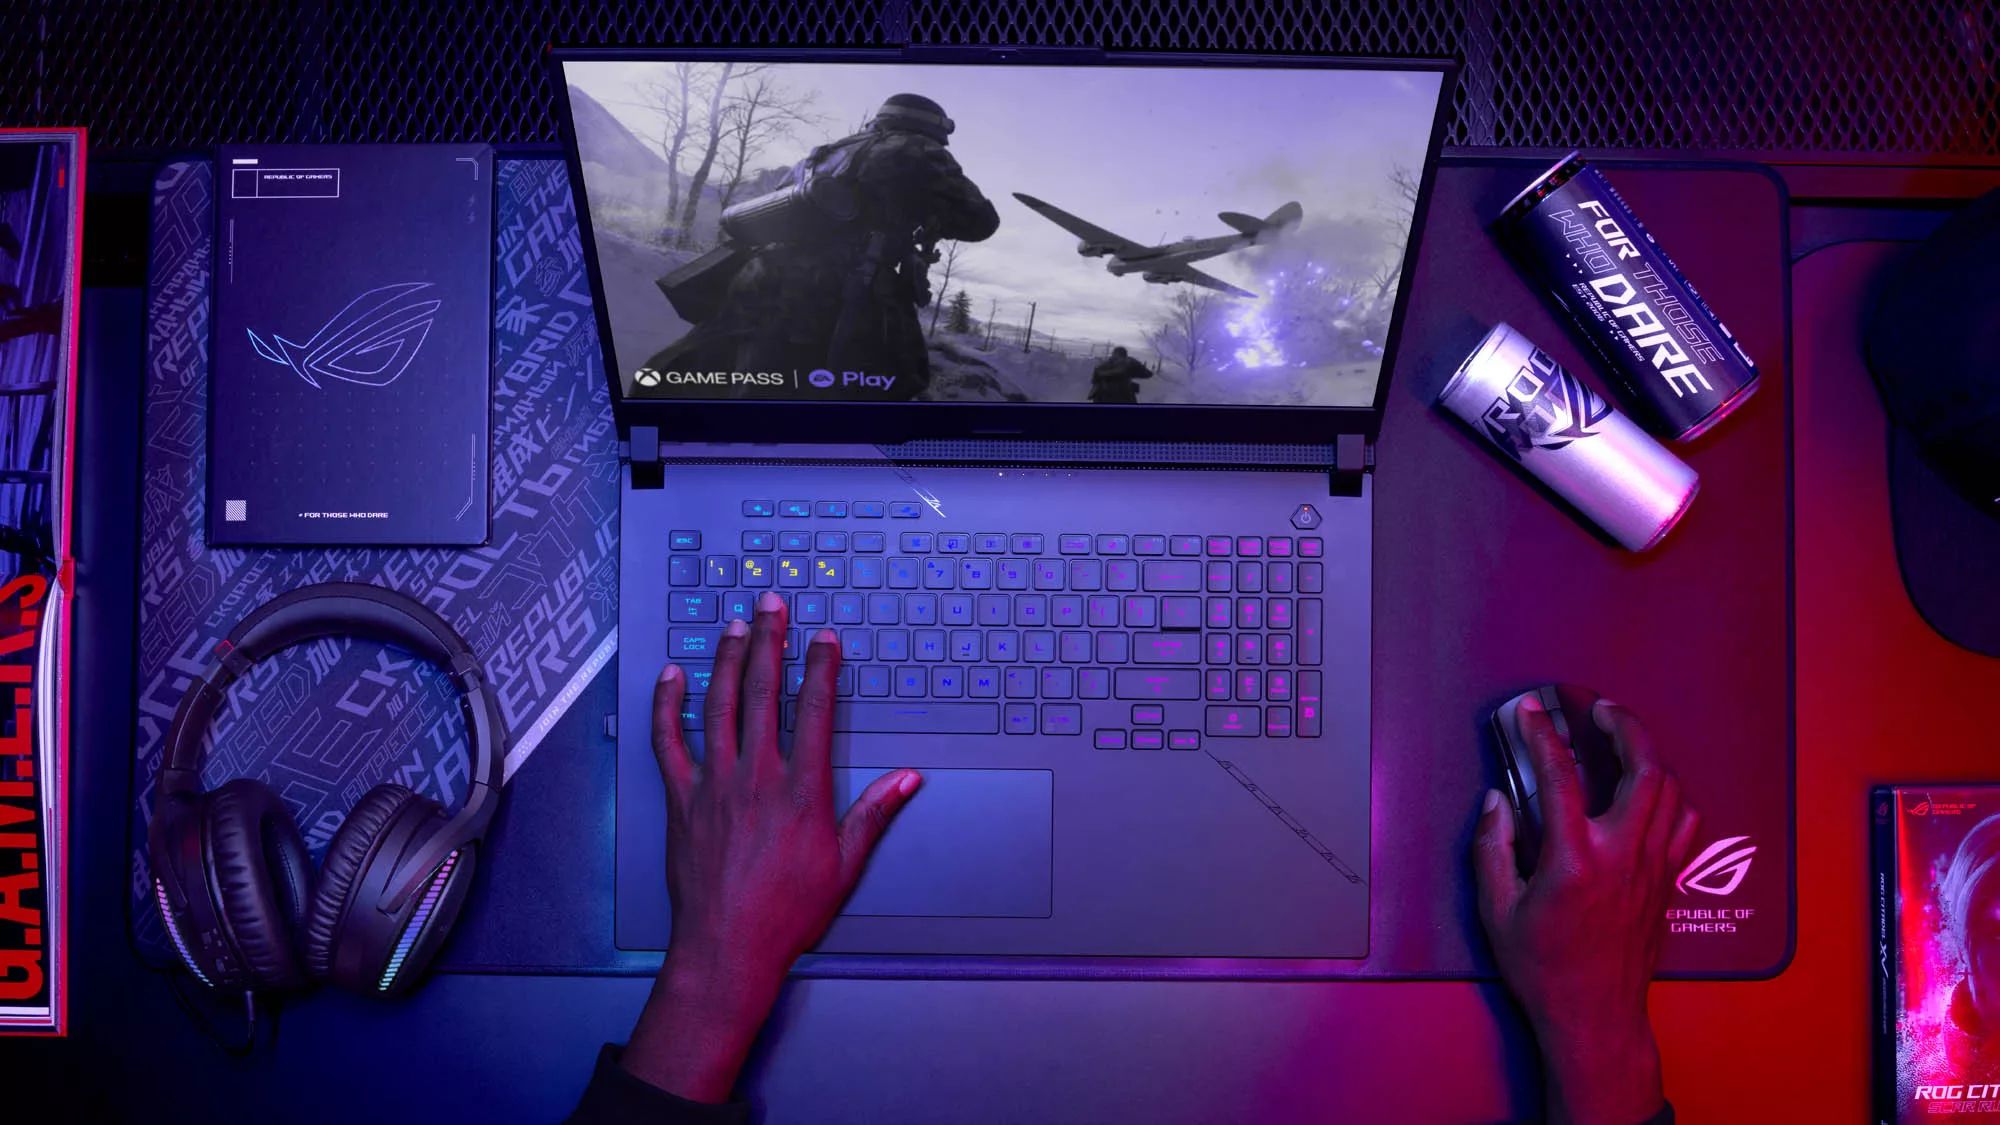 How To Increase Gaming Laptop Performance